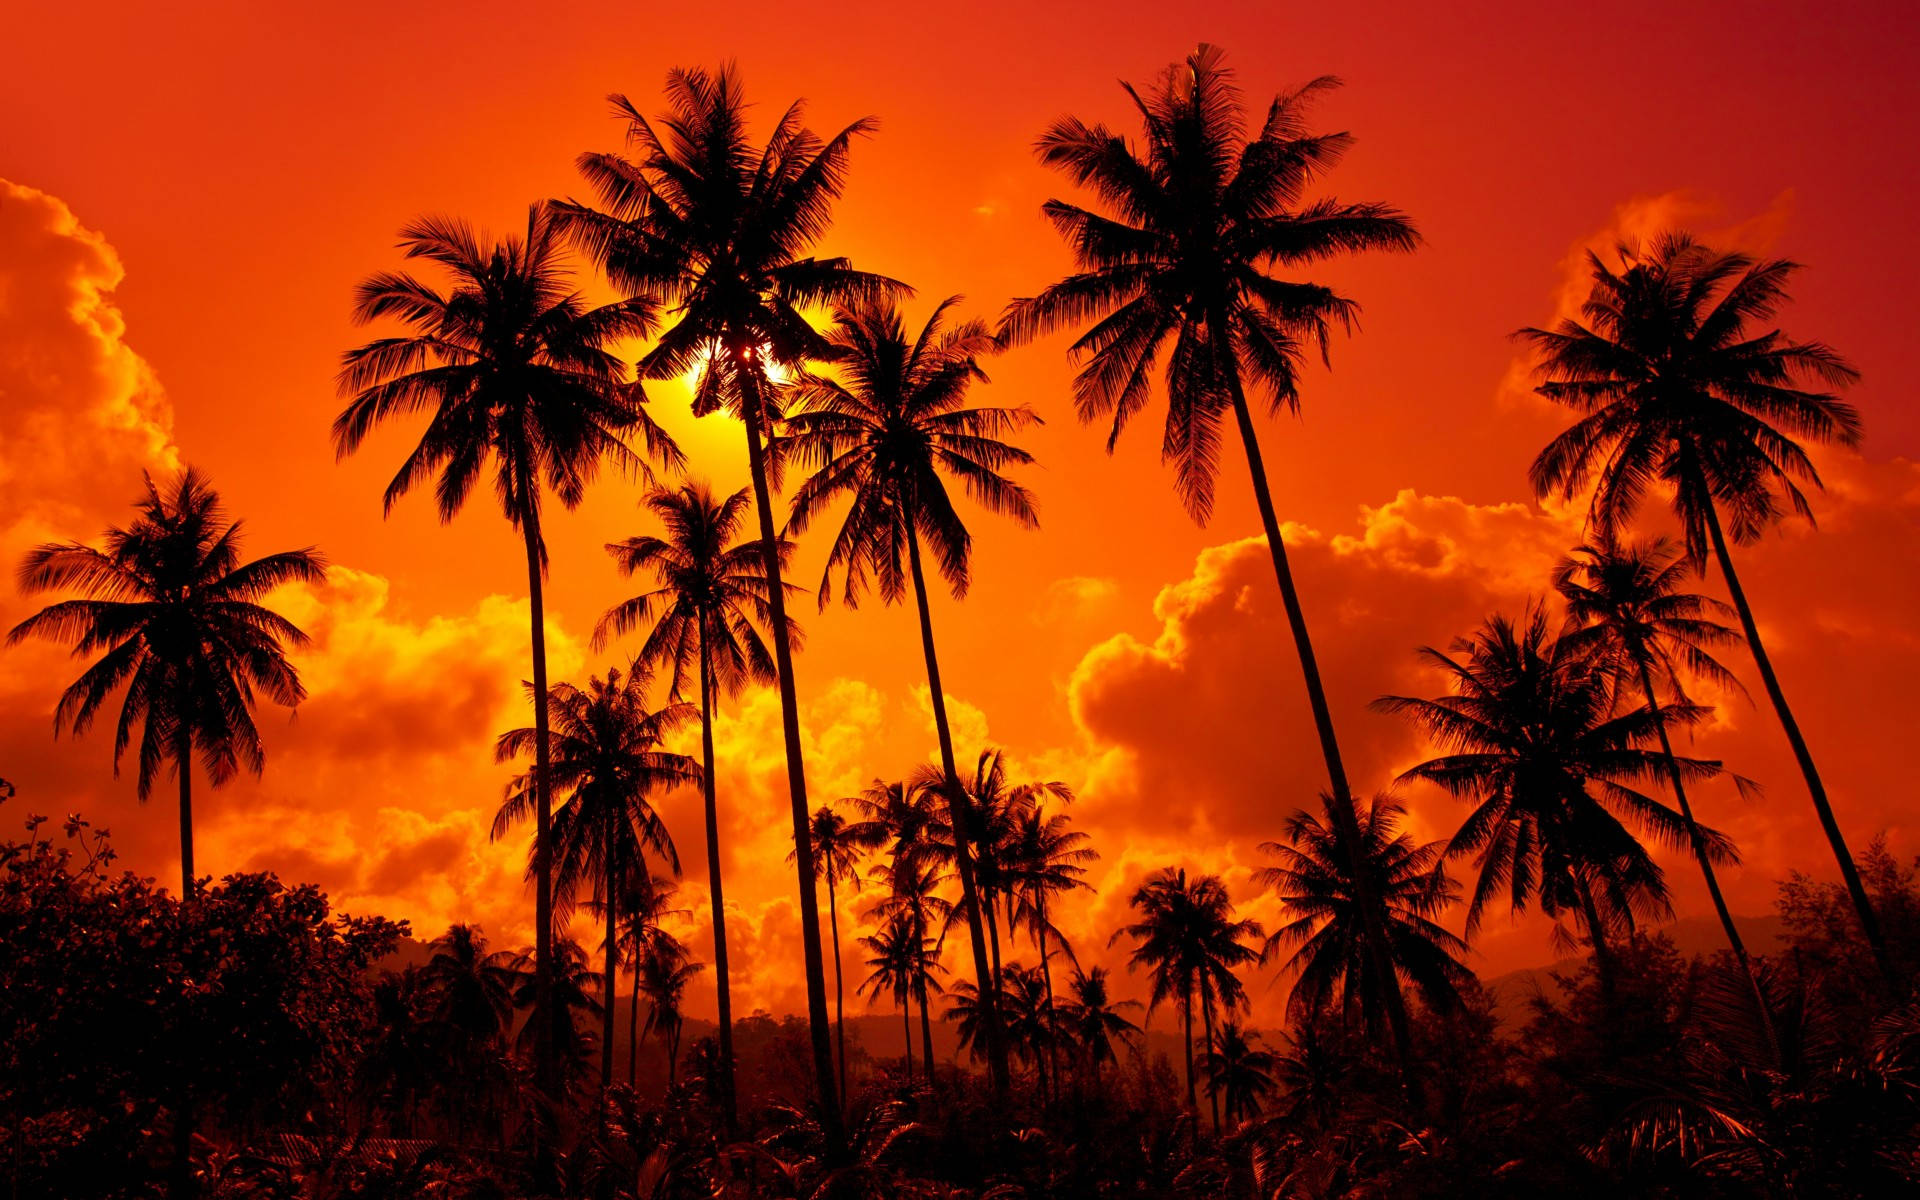 Sunset Orange Sky With Coconut Trees Wallpaper